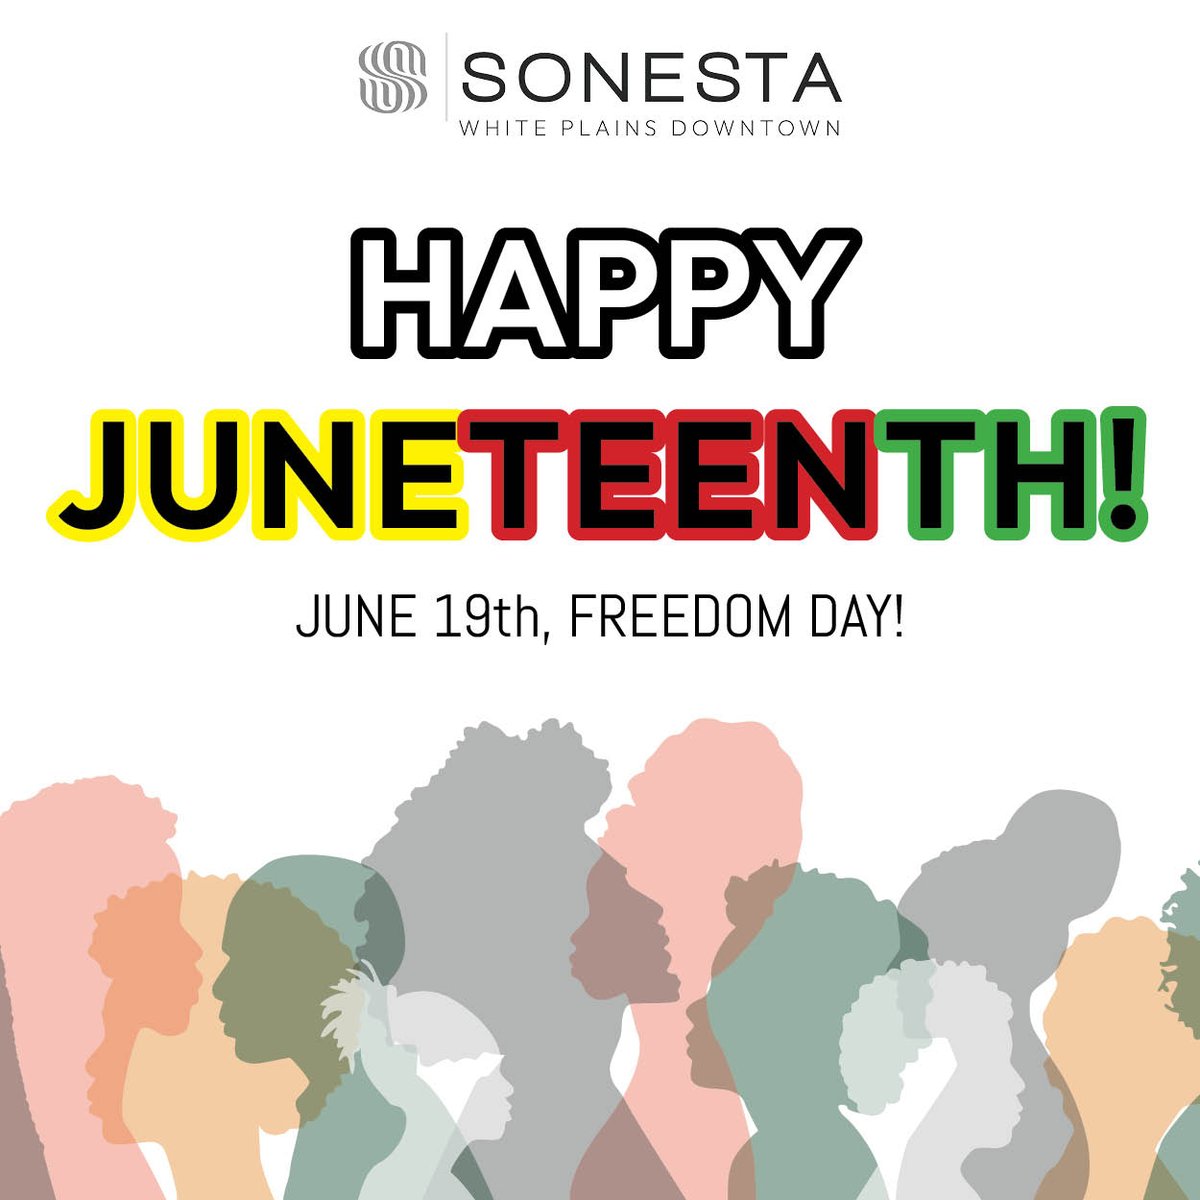 Happy Juneteenth Freedom Day from Sonesta White Plains! Black History is American History, and we are here with open arms and open hearts. The end of slavery does not mean the end of progress, and at Sonesta we welcome all! #Juneteenth #FreedomDay #BlackIndependenceDay #Sonesta